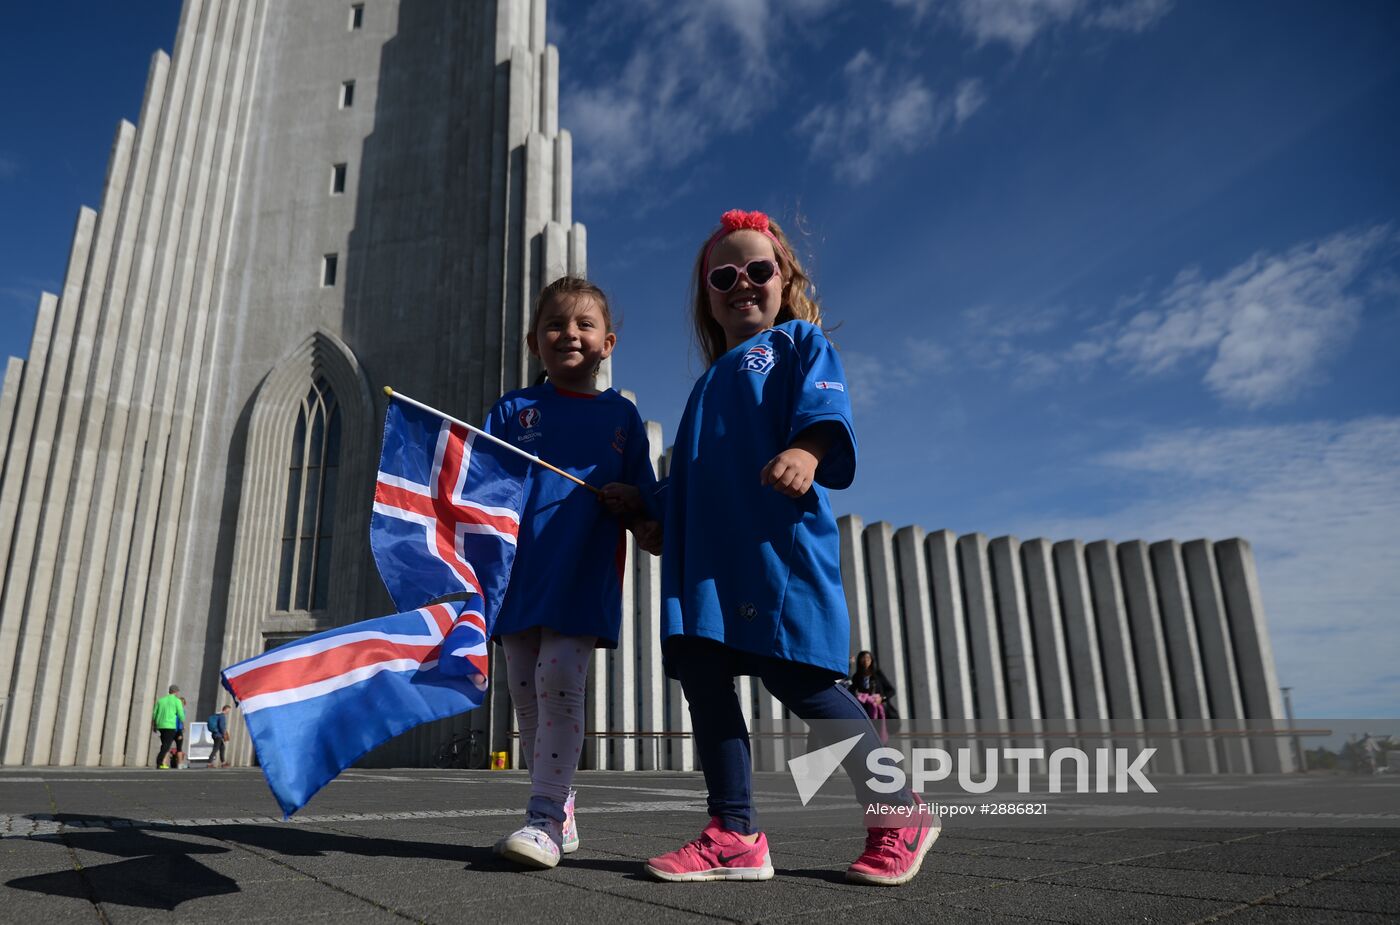 Icelandic national football team greeted by fans after returning from Euro 2016